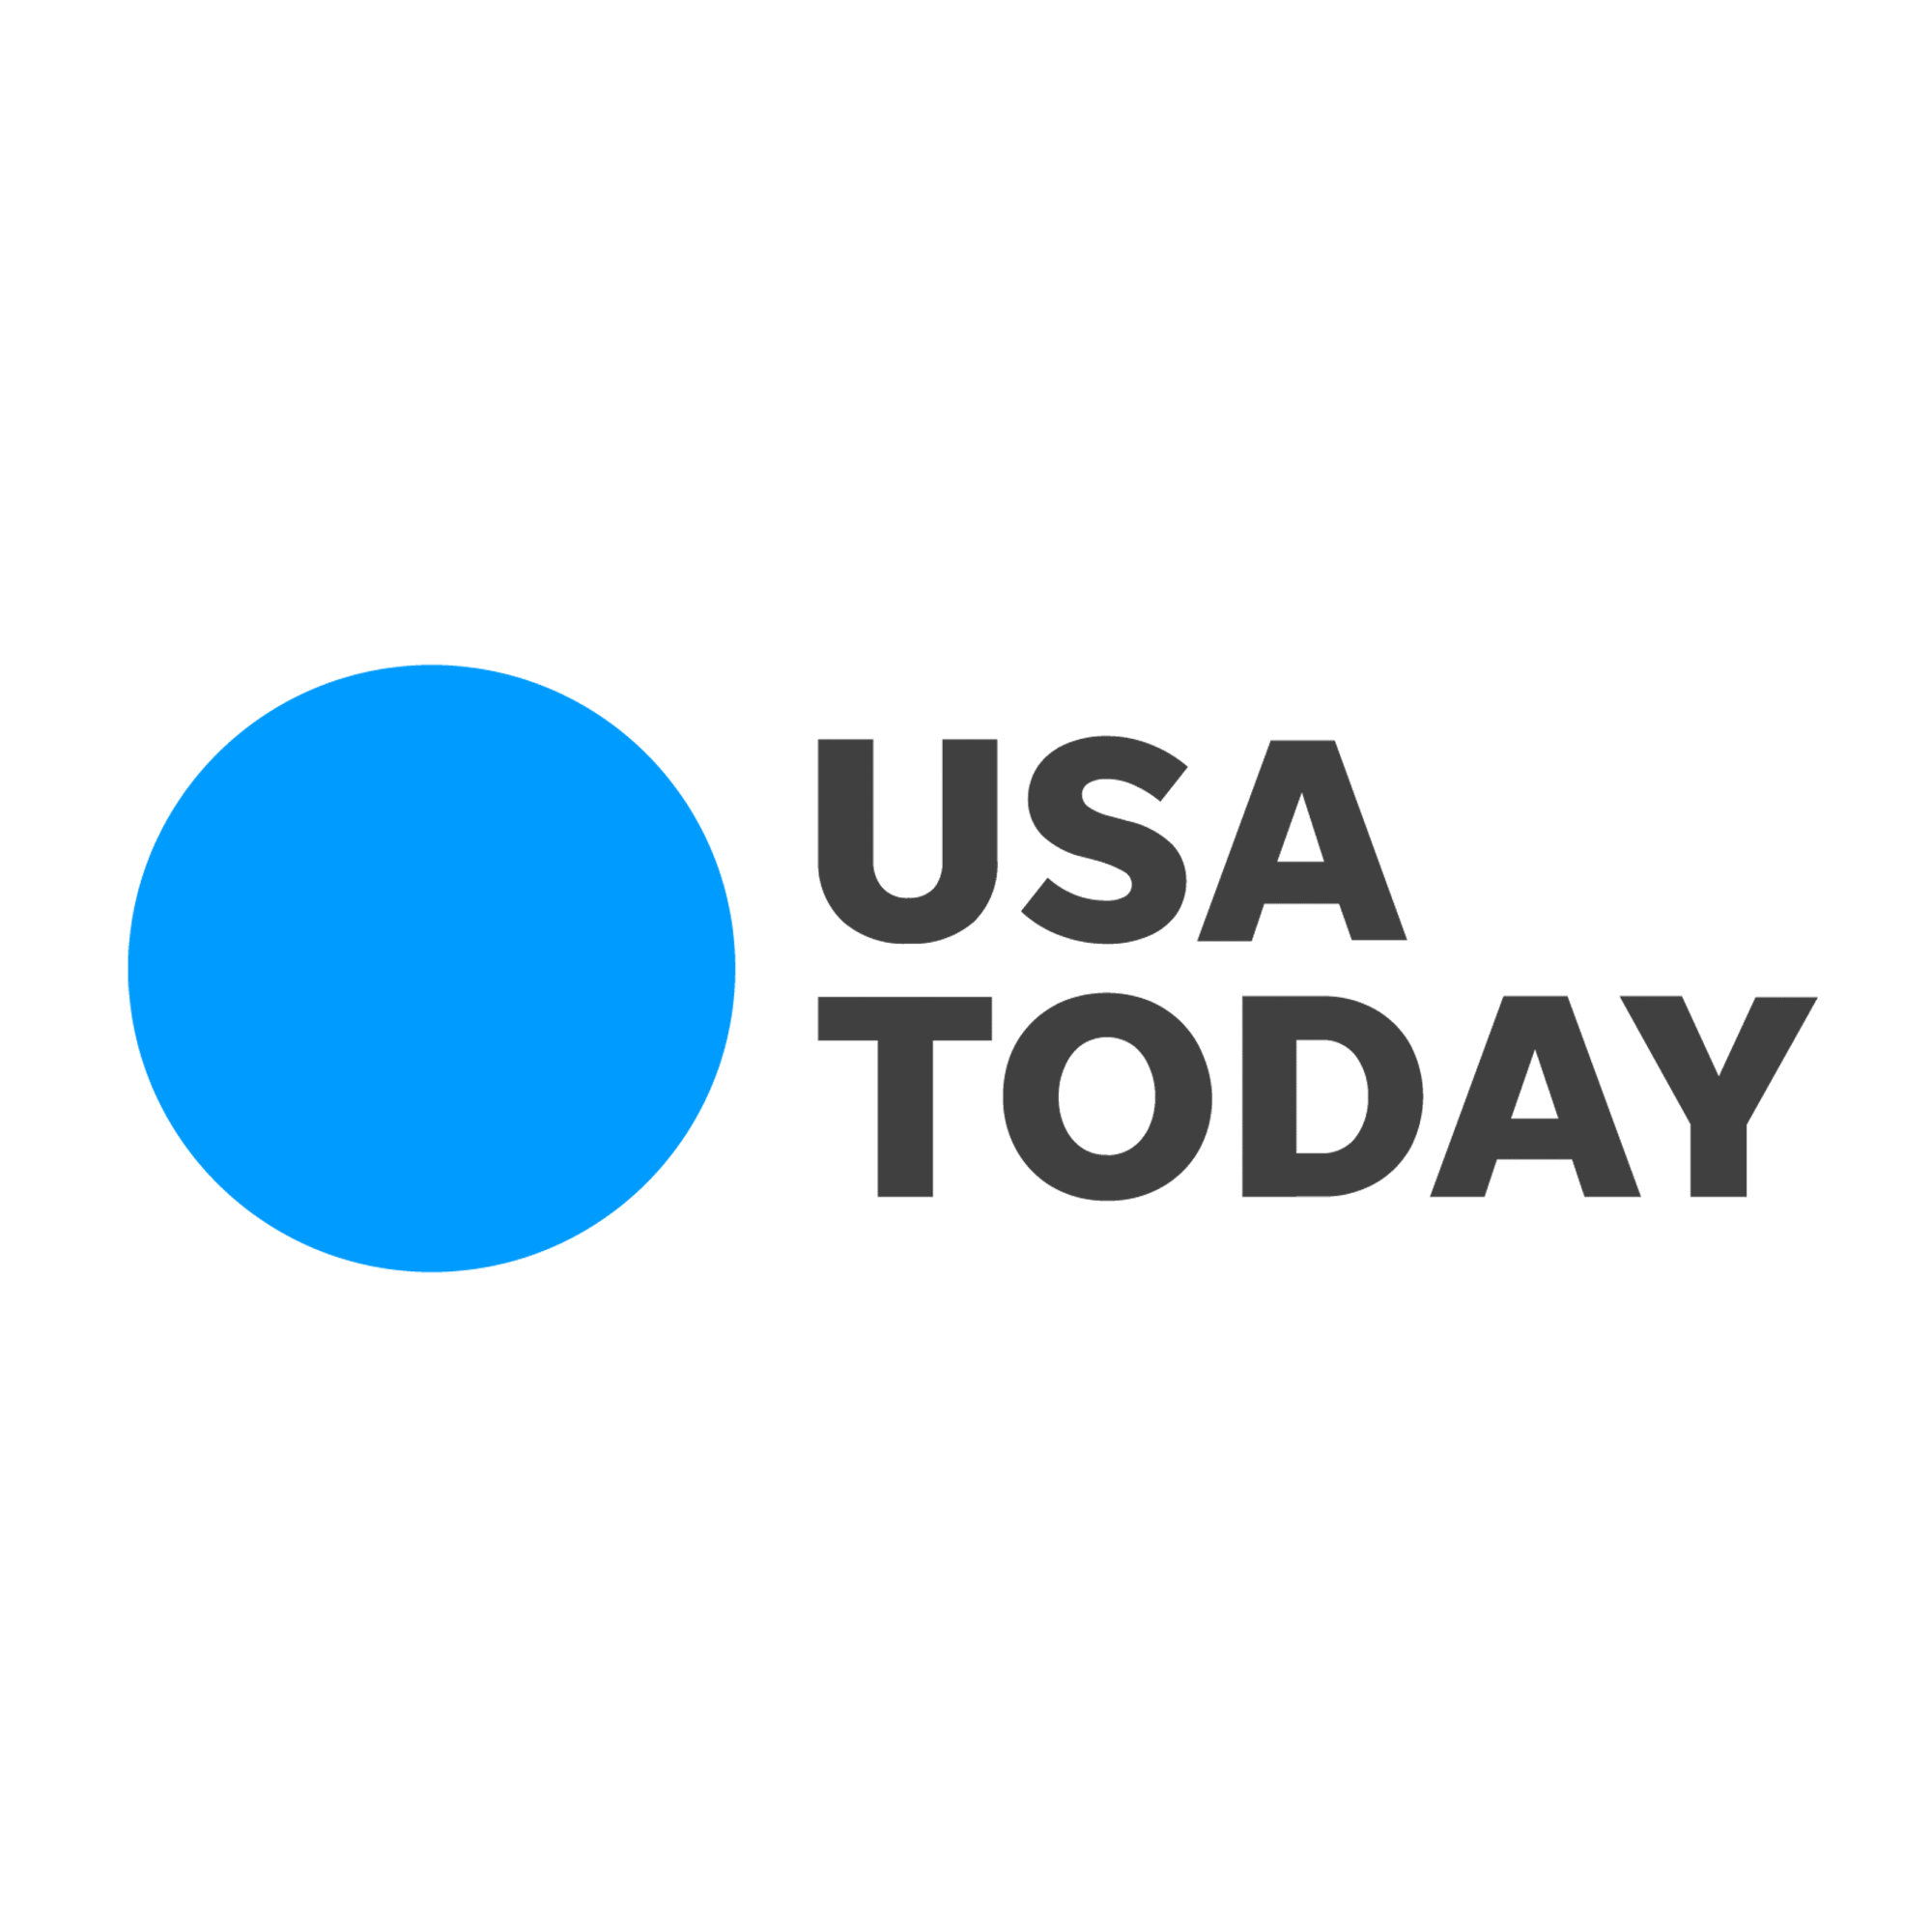 FEATURED ON USA TODAY